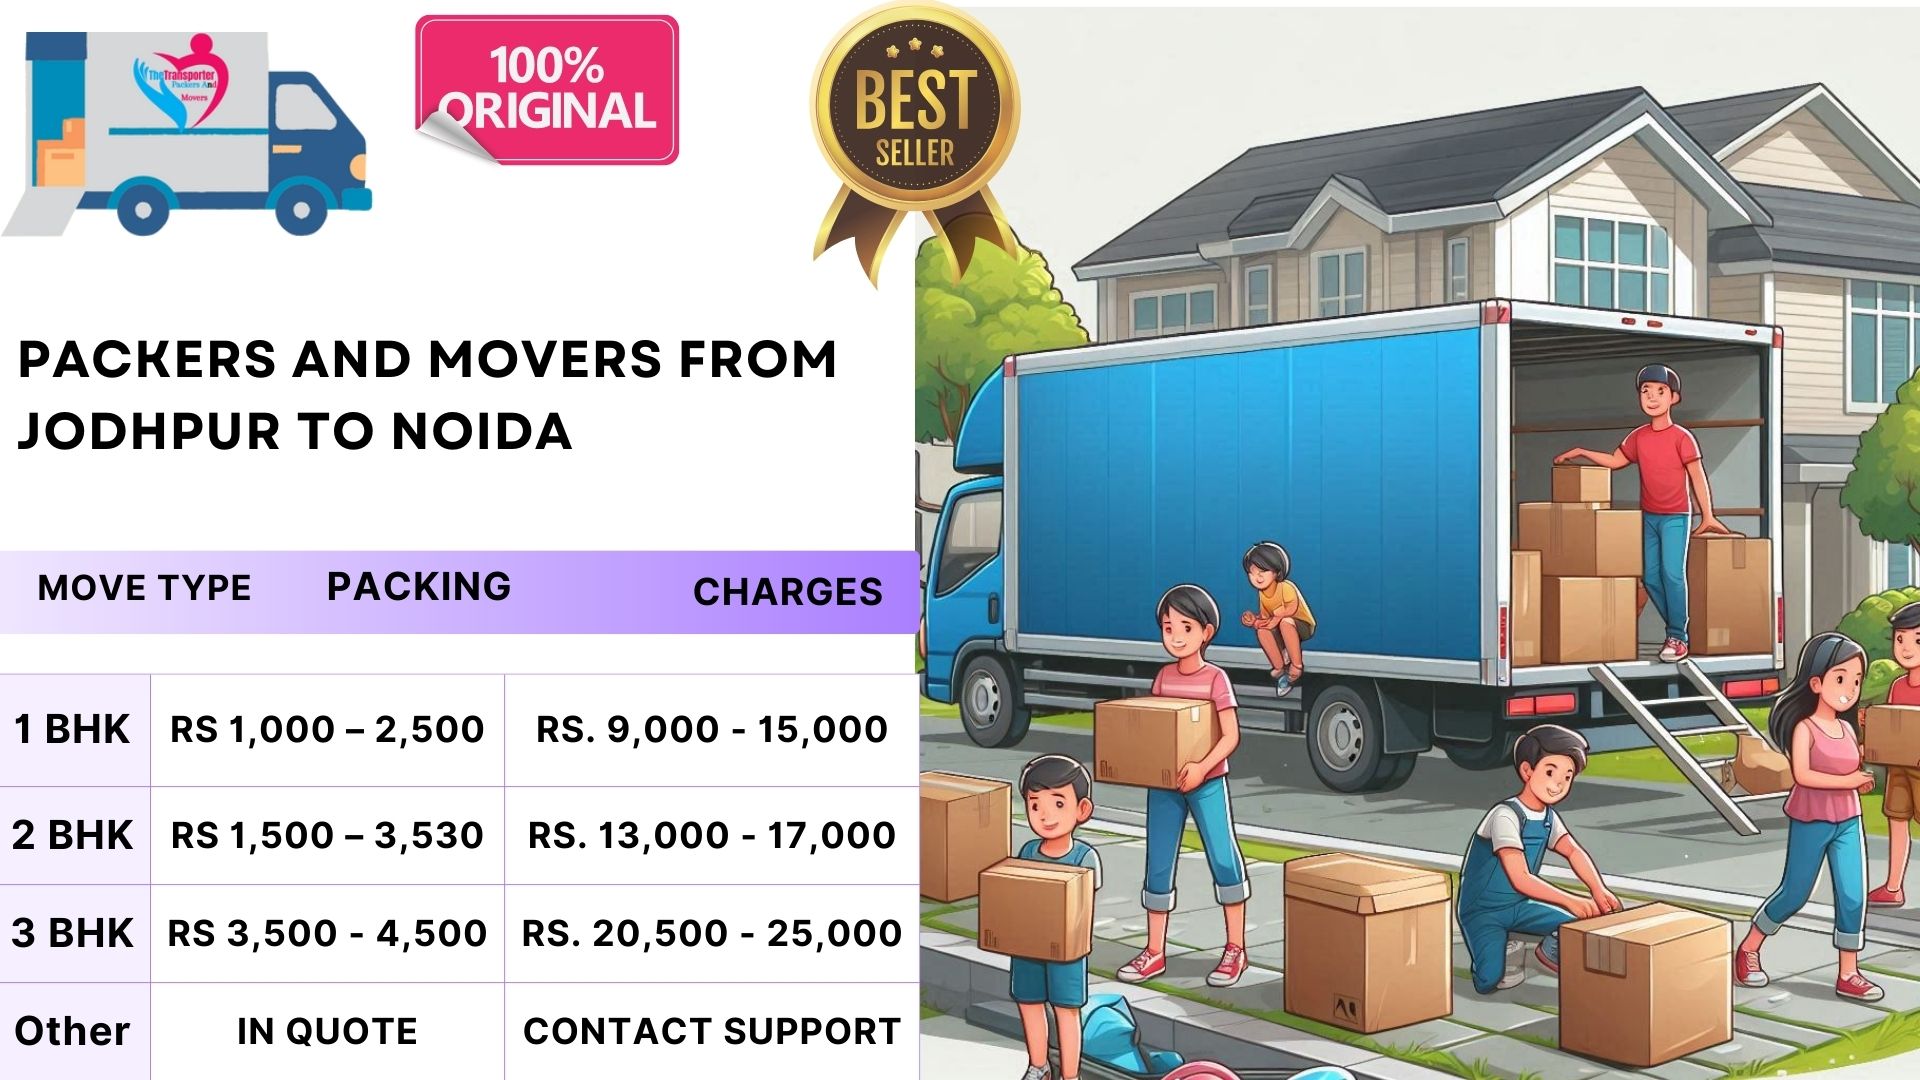 Your household goods shifting from Jodhpur to Noida